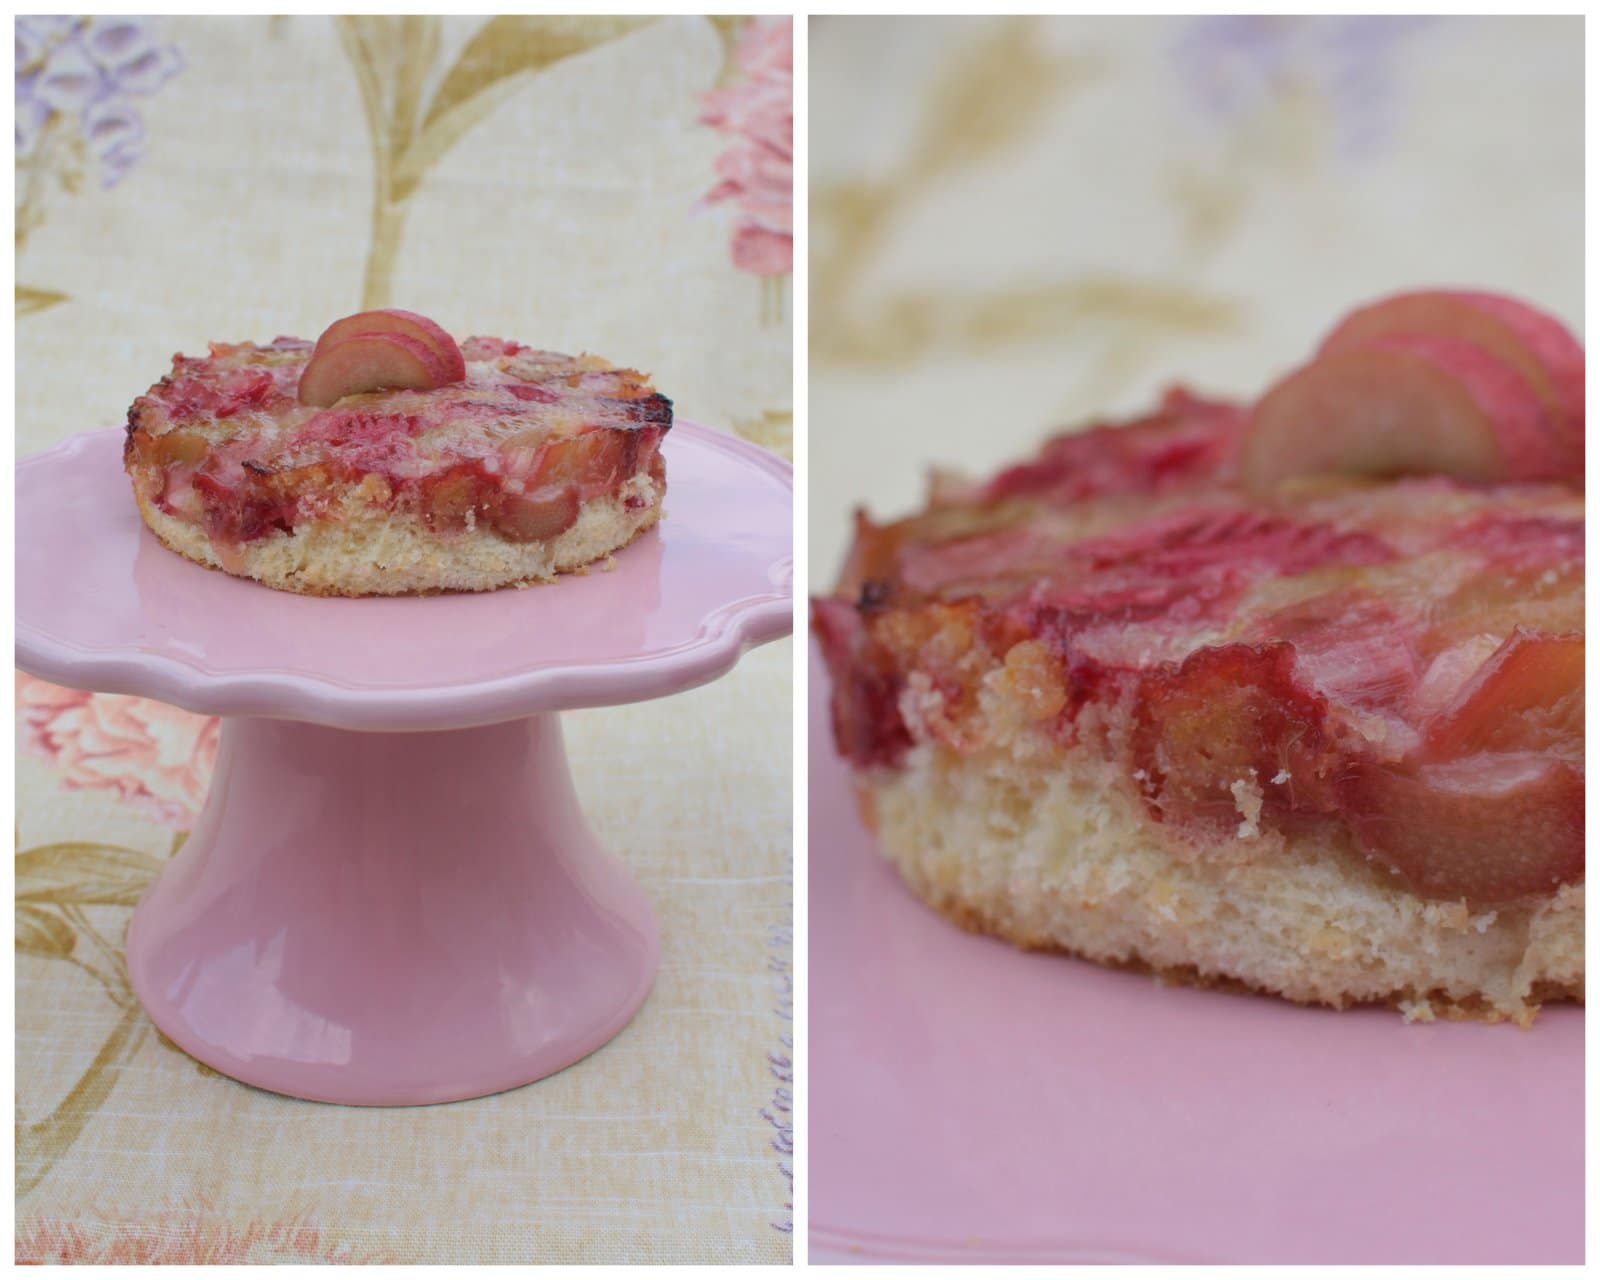 Irresponsibly Yours with Rhubarb Upside-Down Cake